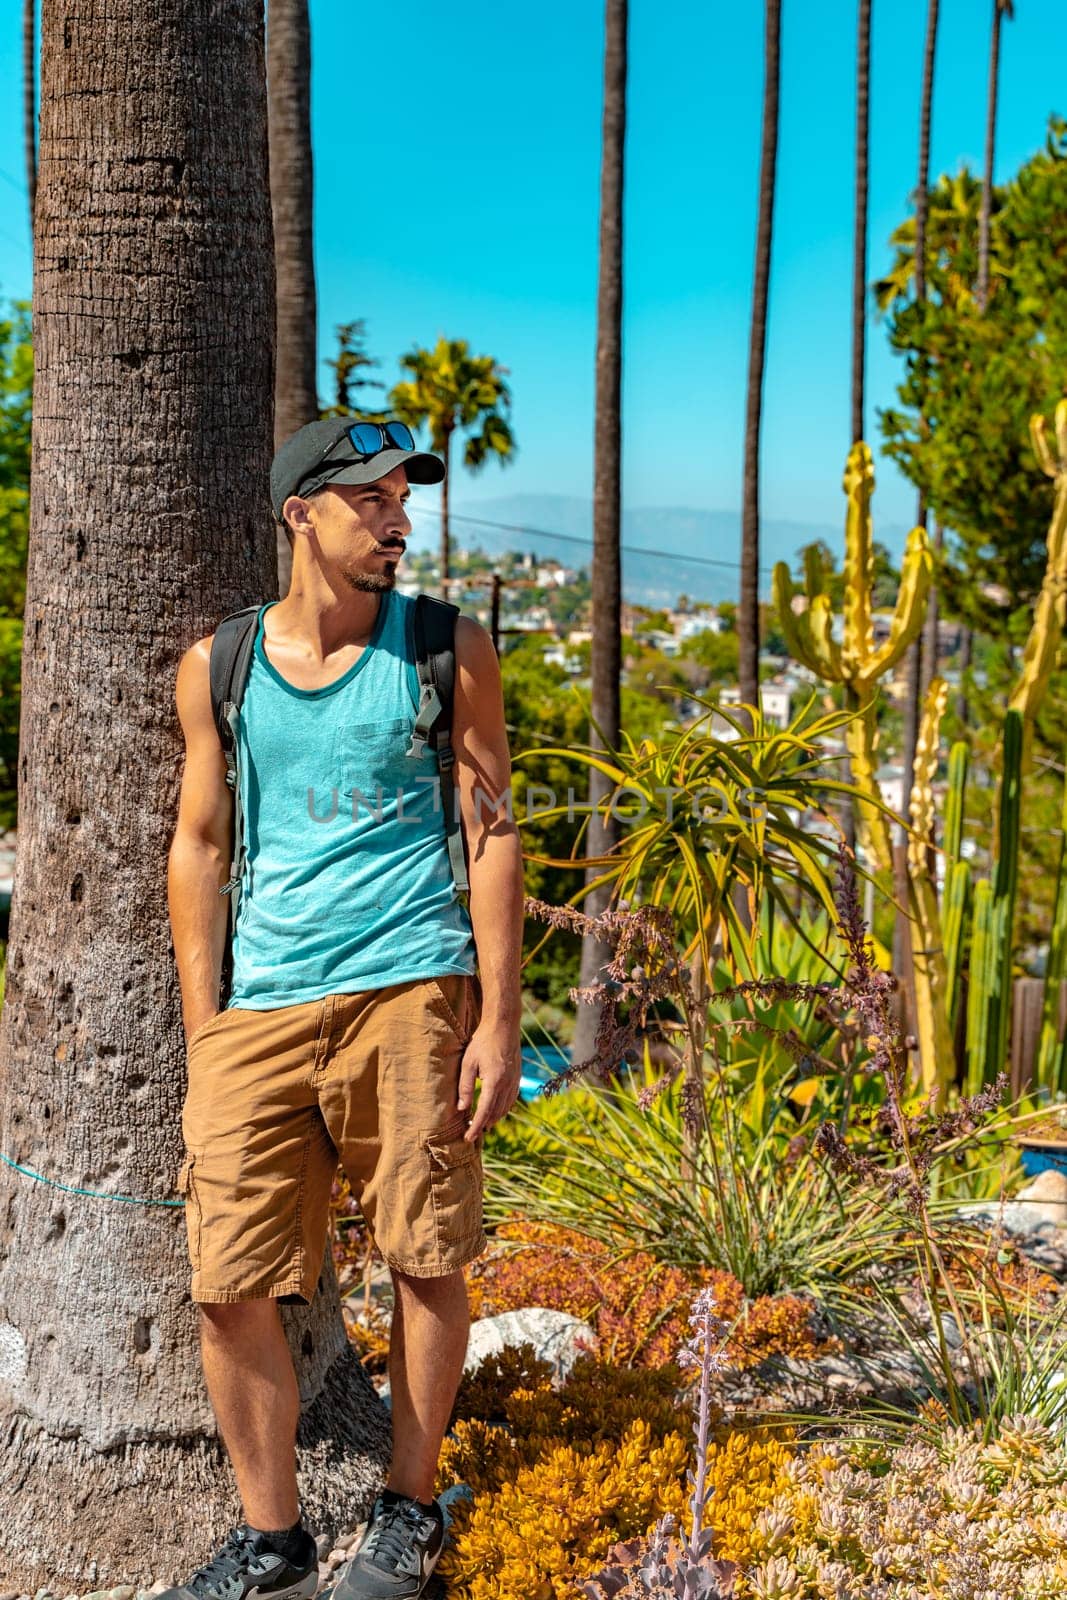 Portrait of stylish student in California with palm trees in the background during a sunny colorful day. High quality photo